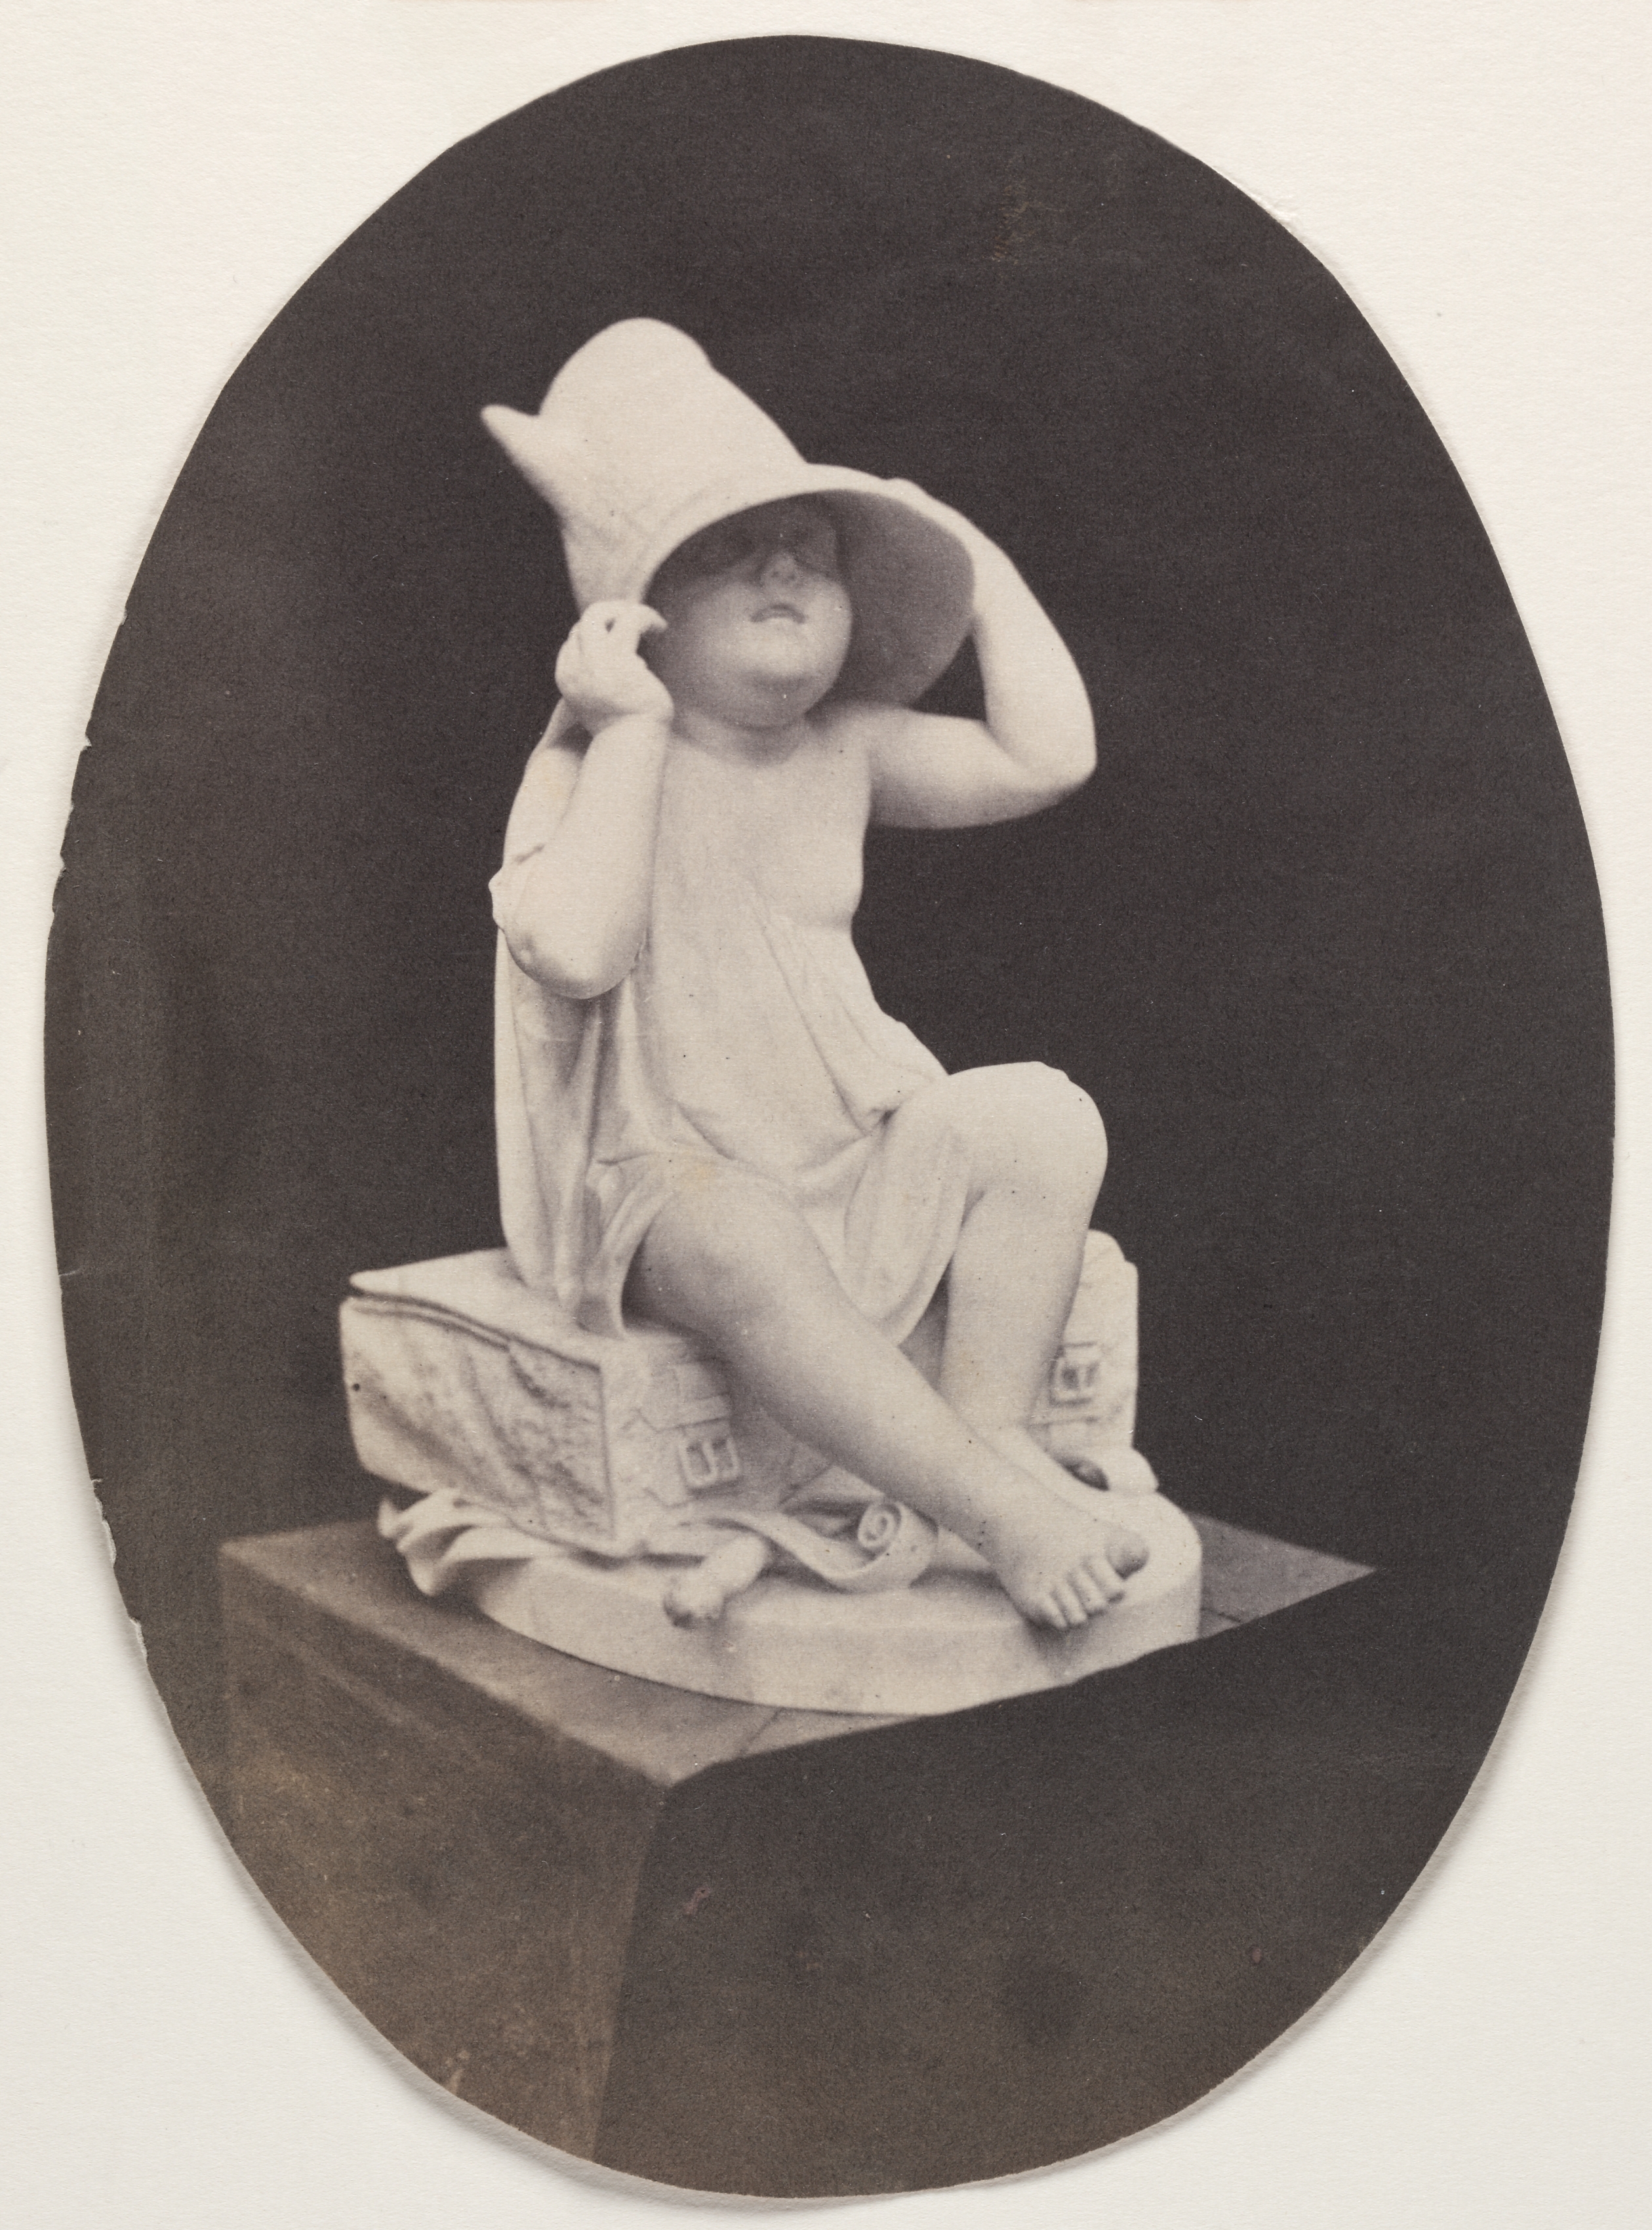 Statue of a Youth in Large Hat (from a John R. Johnston album)